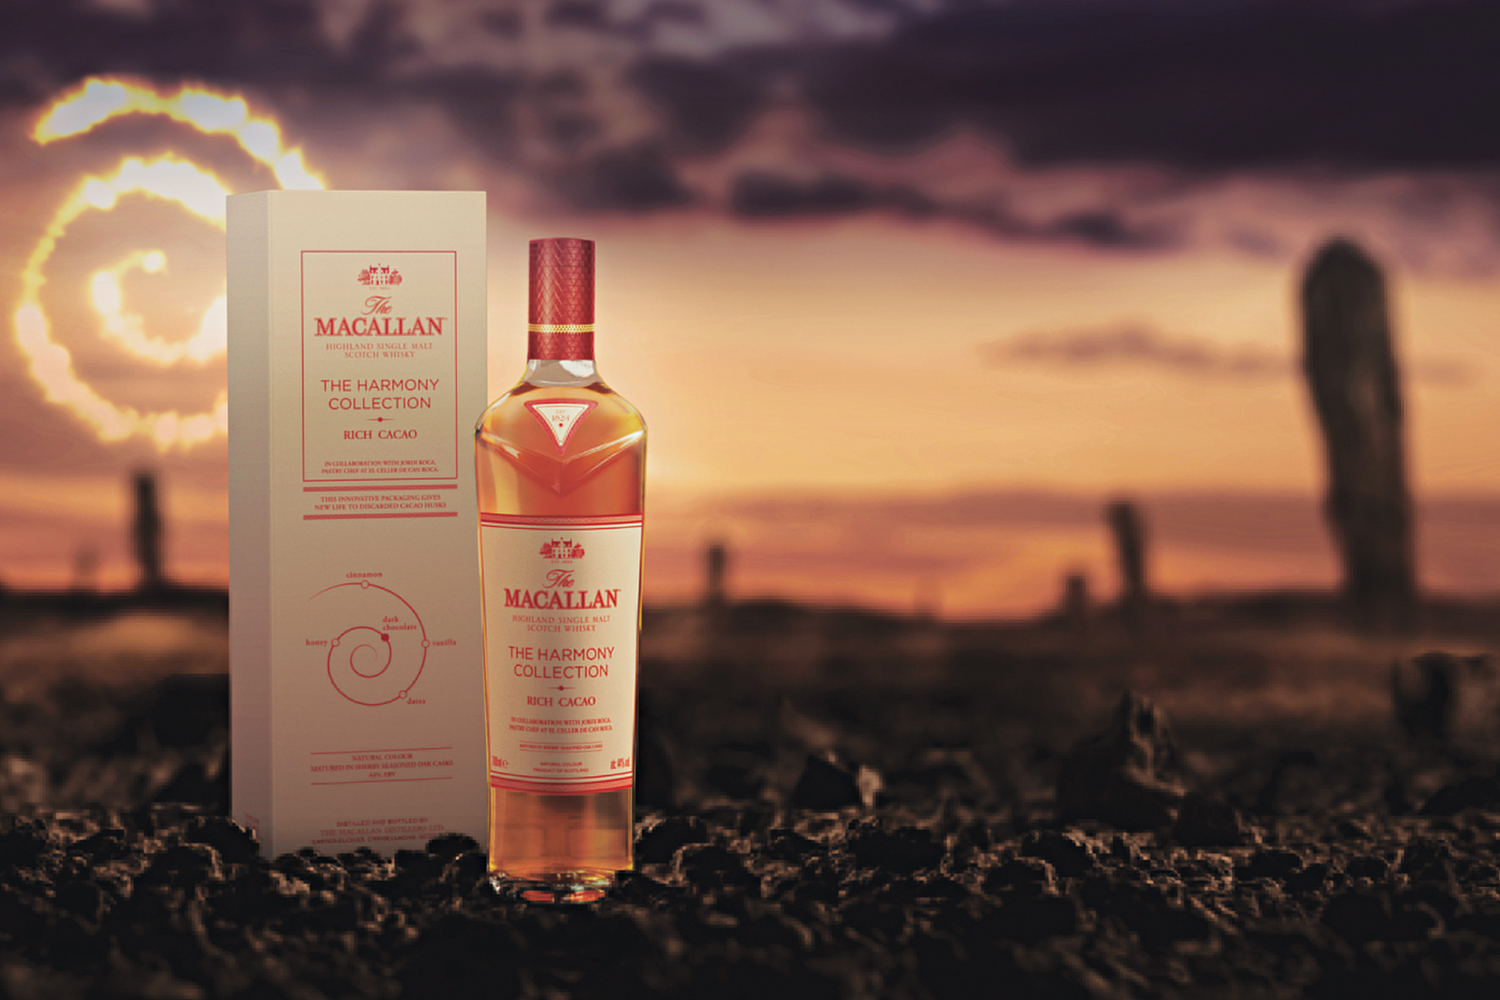 The Macallan In Harmony with Nature and Chocolate 